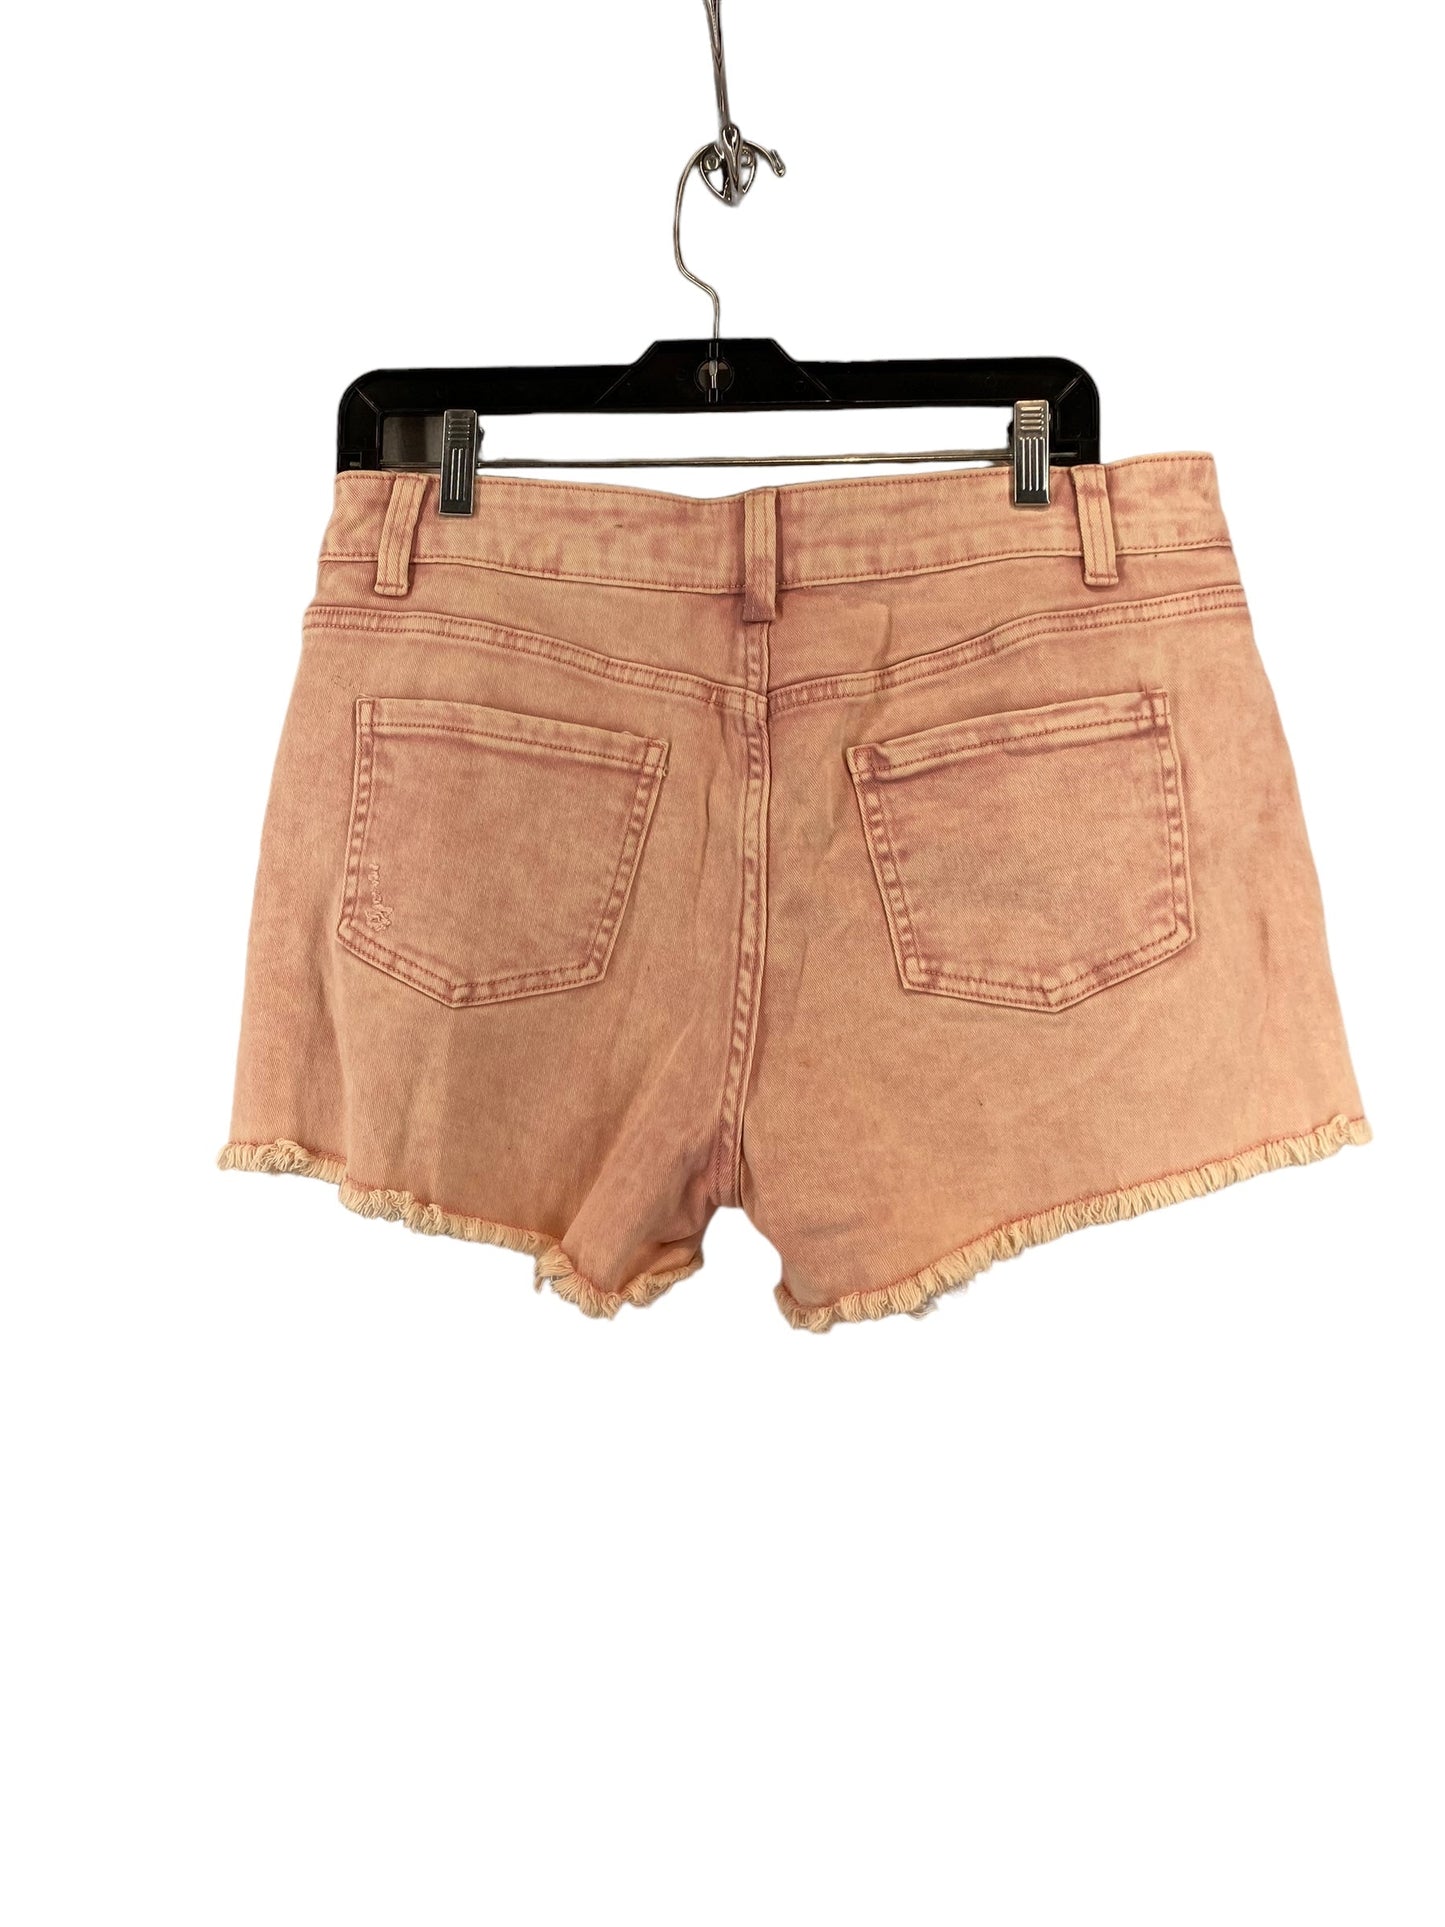 Pink Denim Shorts Time And Tru, Size 10